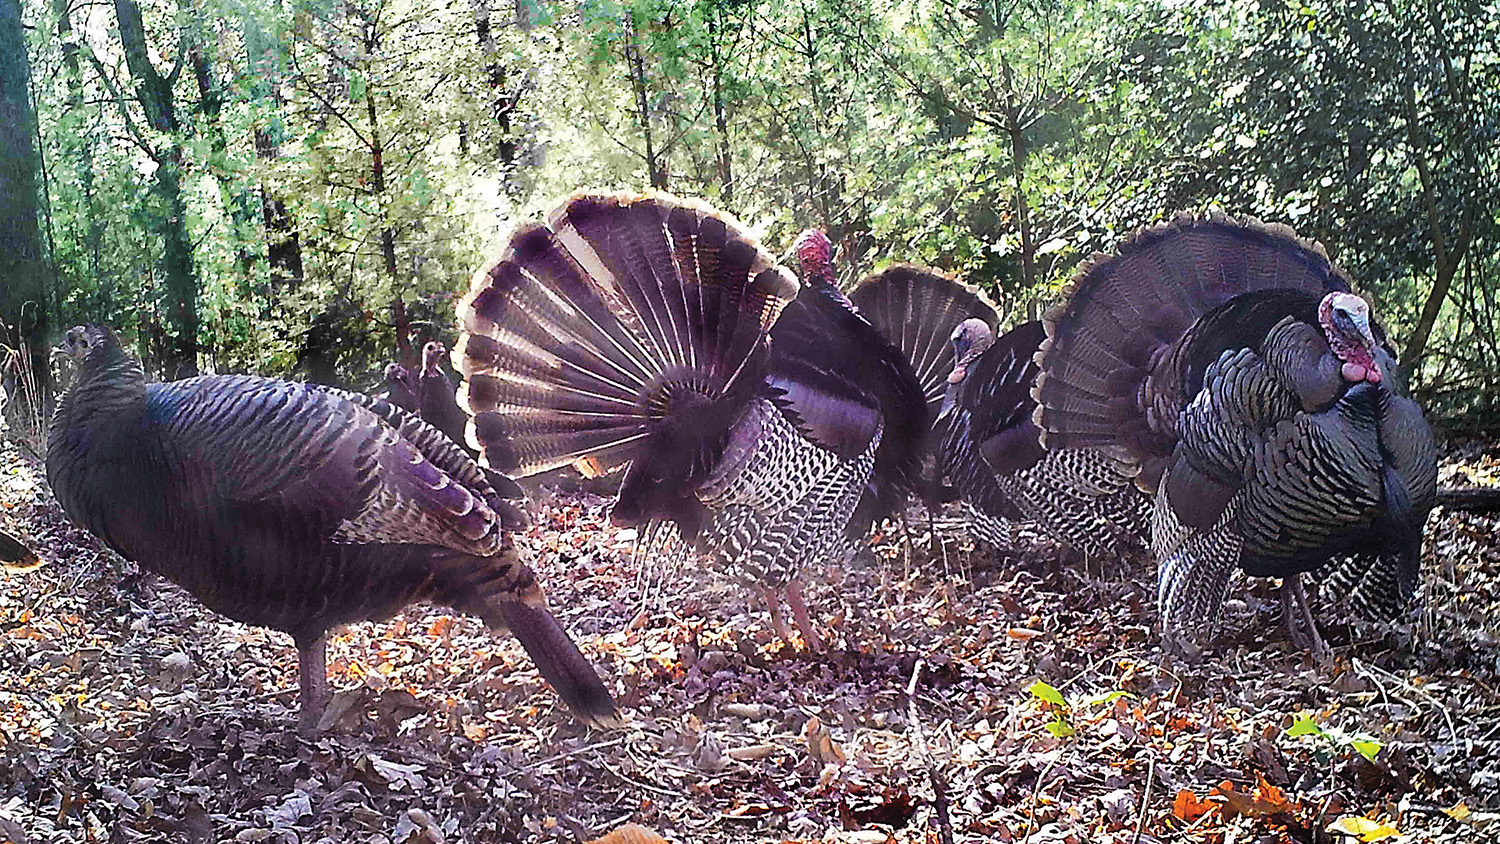 Turkeys stand together in a forest - Tracking Turkeys - Forestry and Environmental Resources NC State University